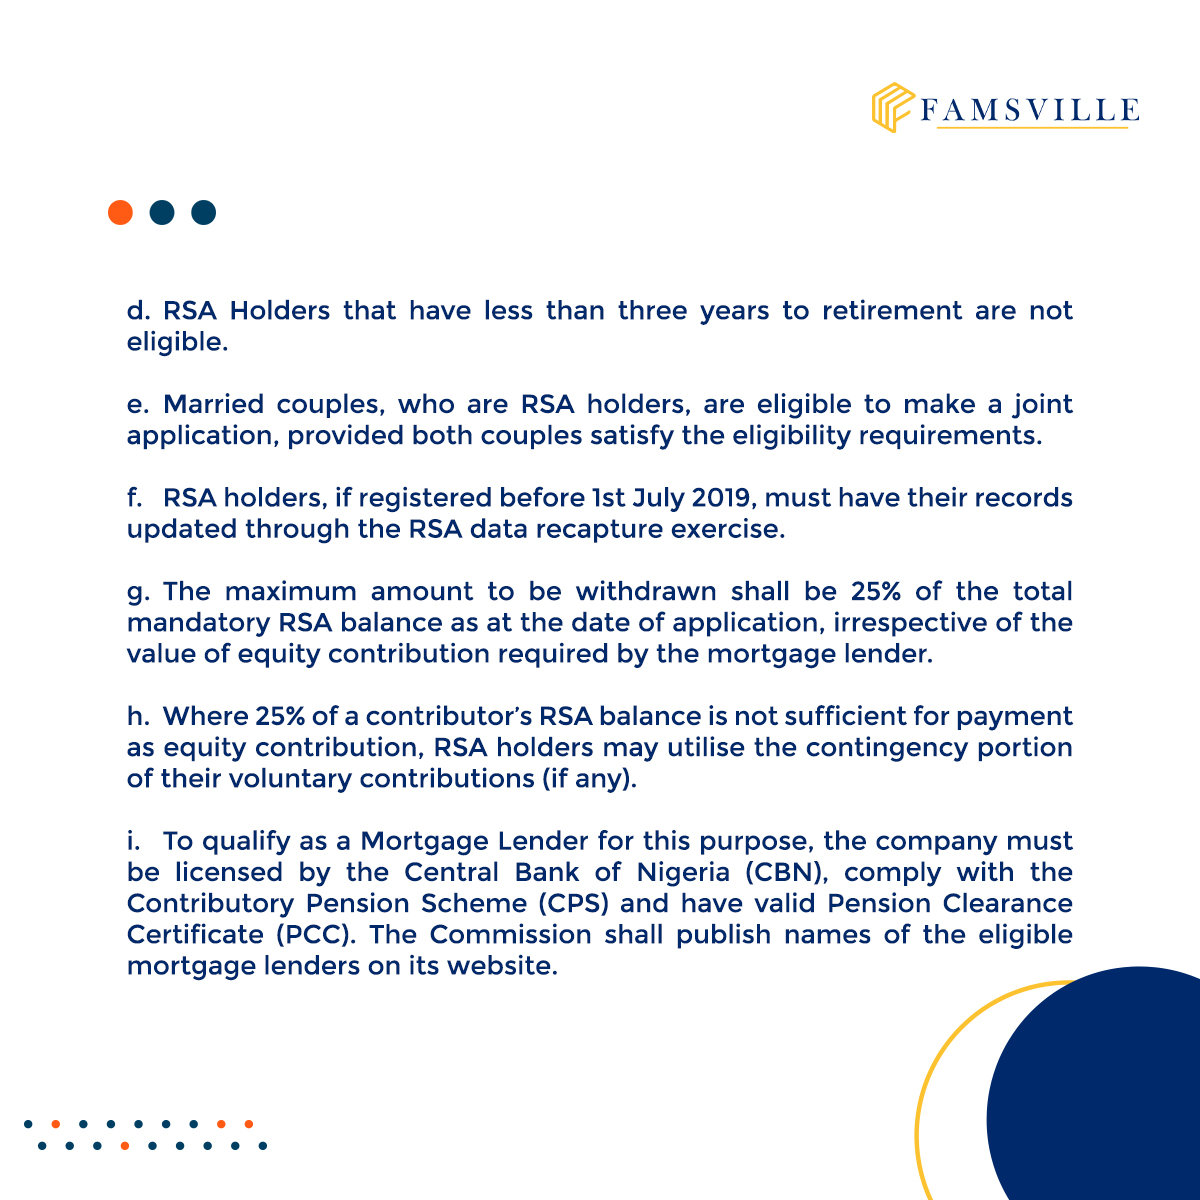 In a press release on the 23rd of September, 2022, Pencom announces its approval of the use of pension funds for mortgage equity contribution🔽🔽

#Famsville #Pension #pensionfunds #employmentlaw #labourrelations #labourlaw #employmentandlabour #corporatelaw #pensionattention